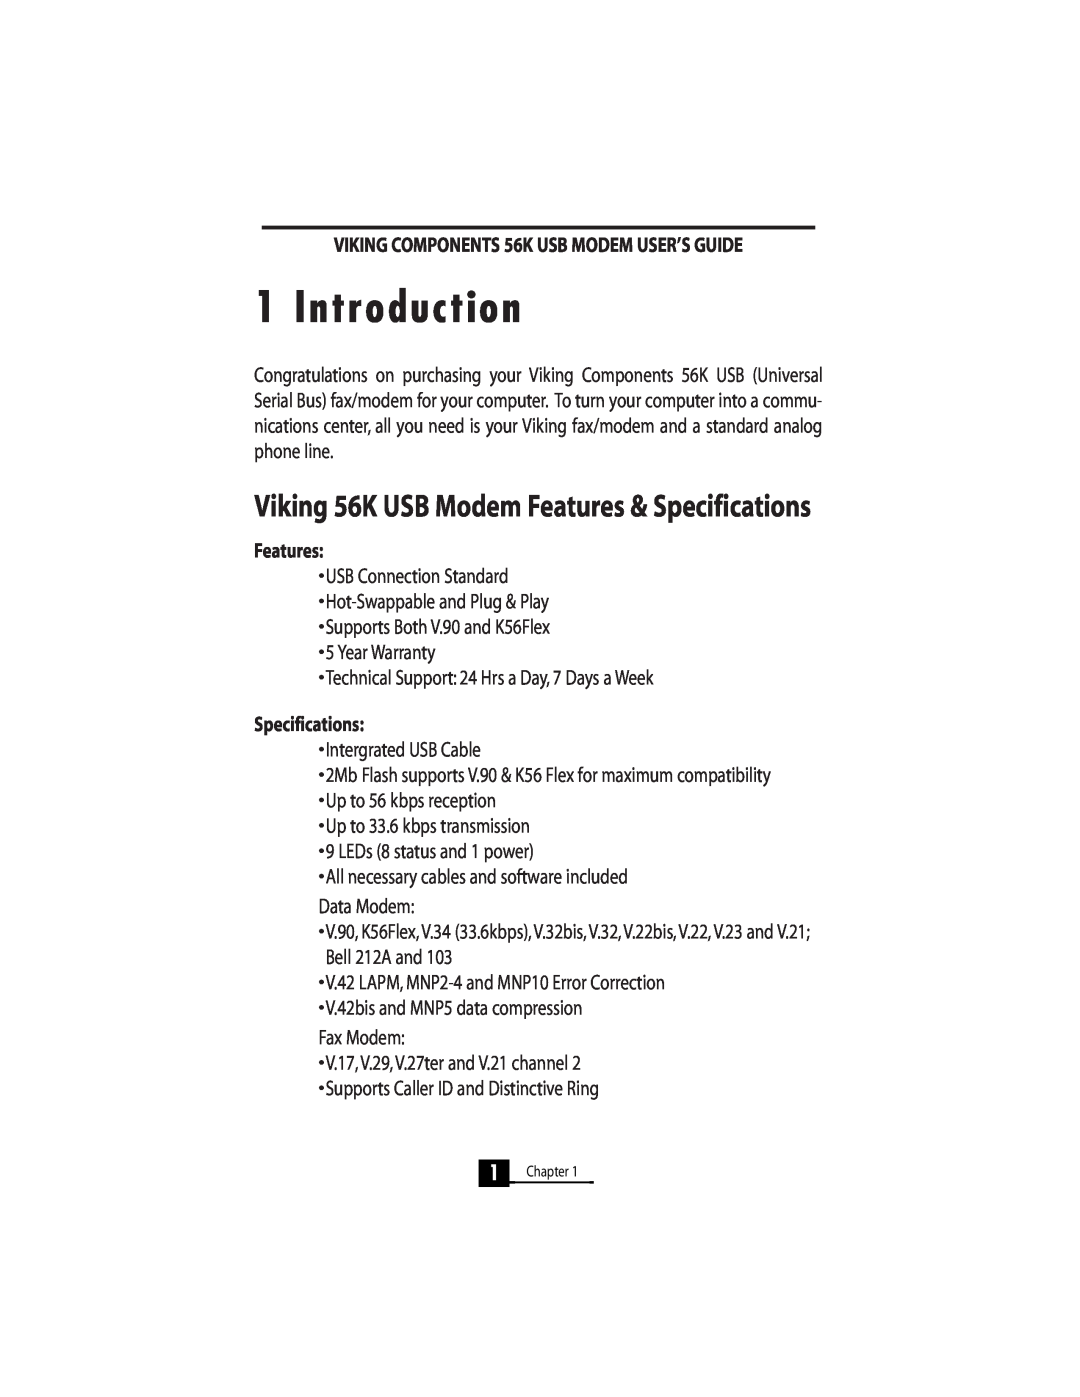 Viking InterWorks manual Introduction, Viking 56K USB Modem Features & Specifications 